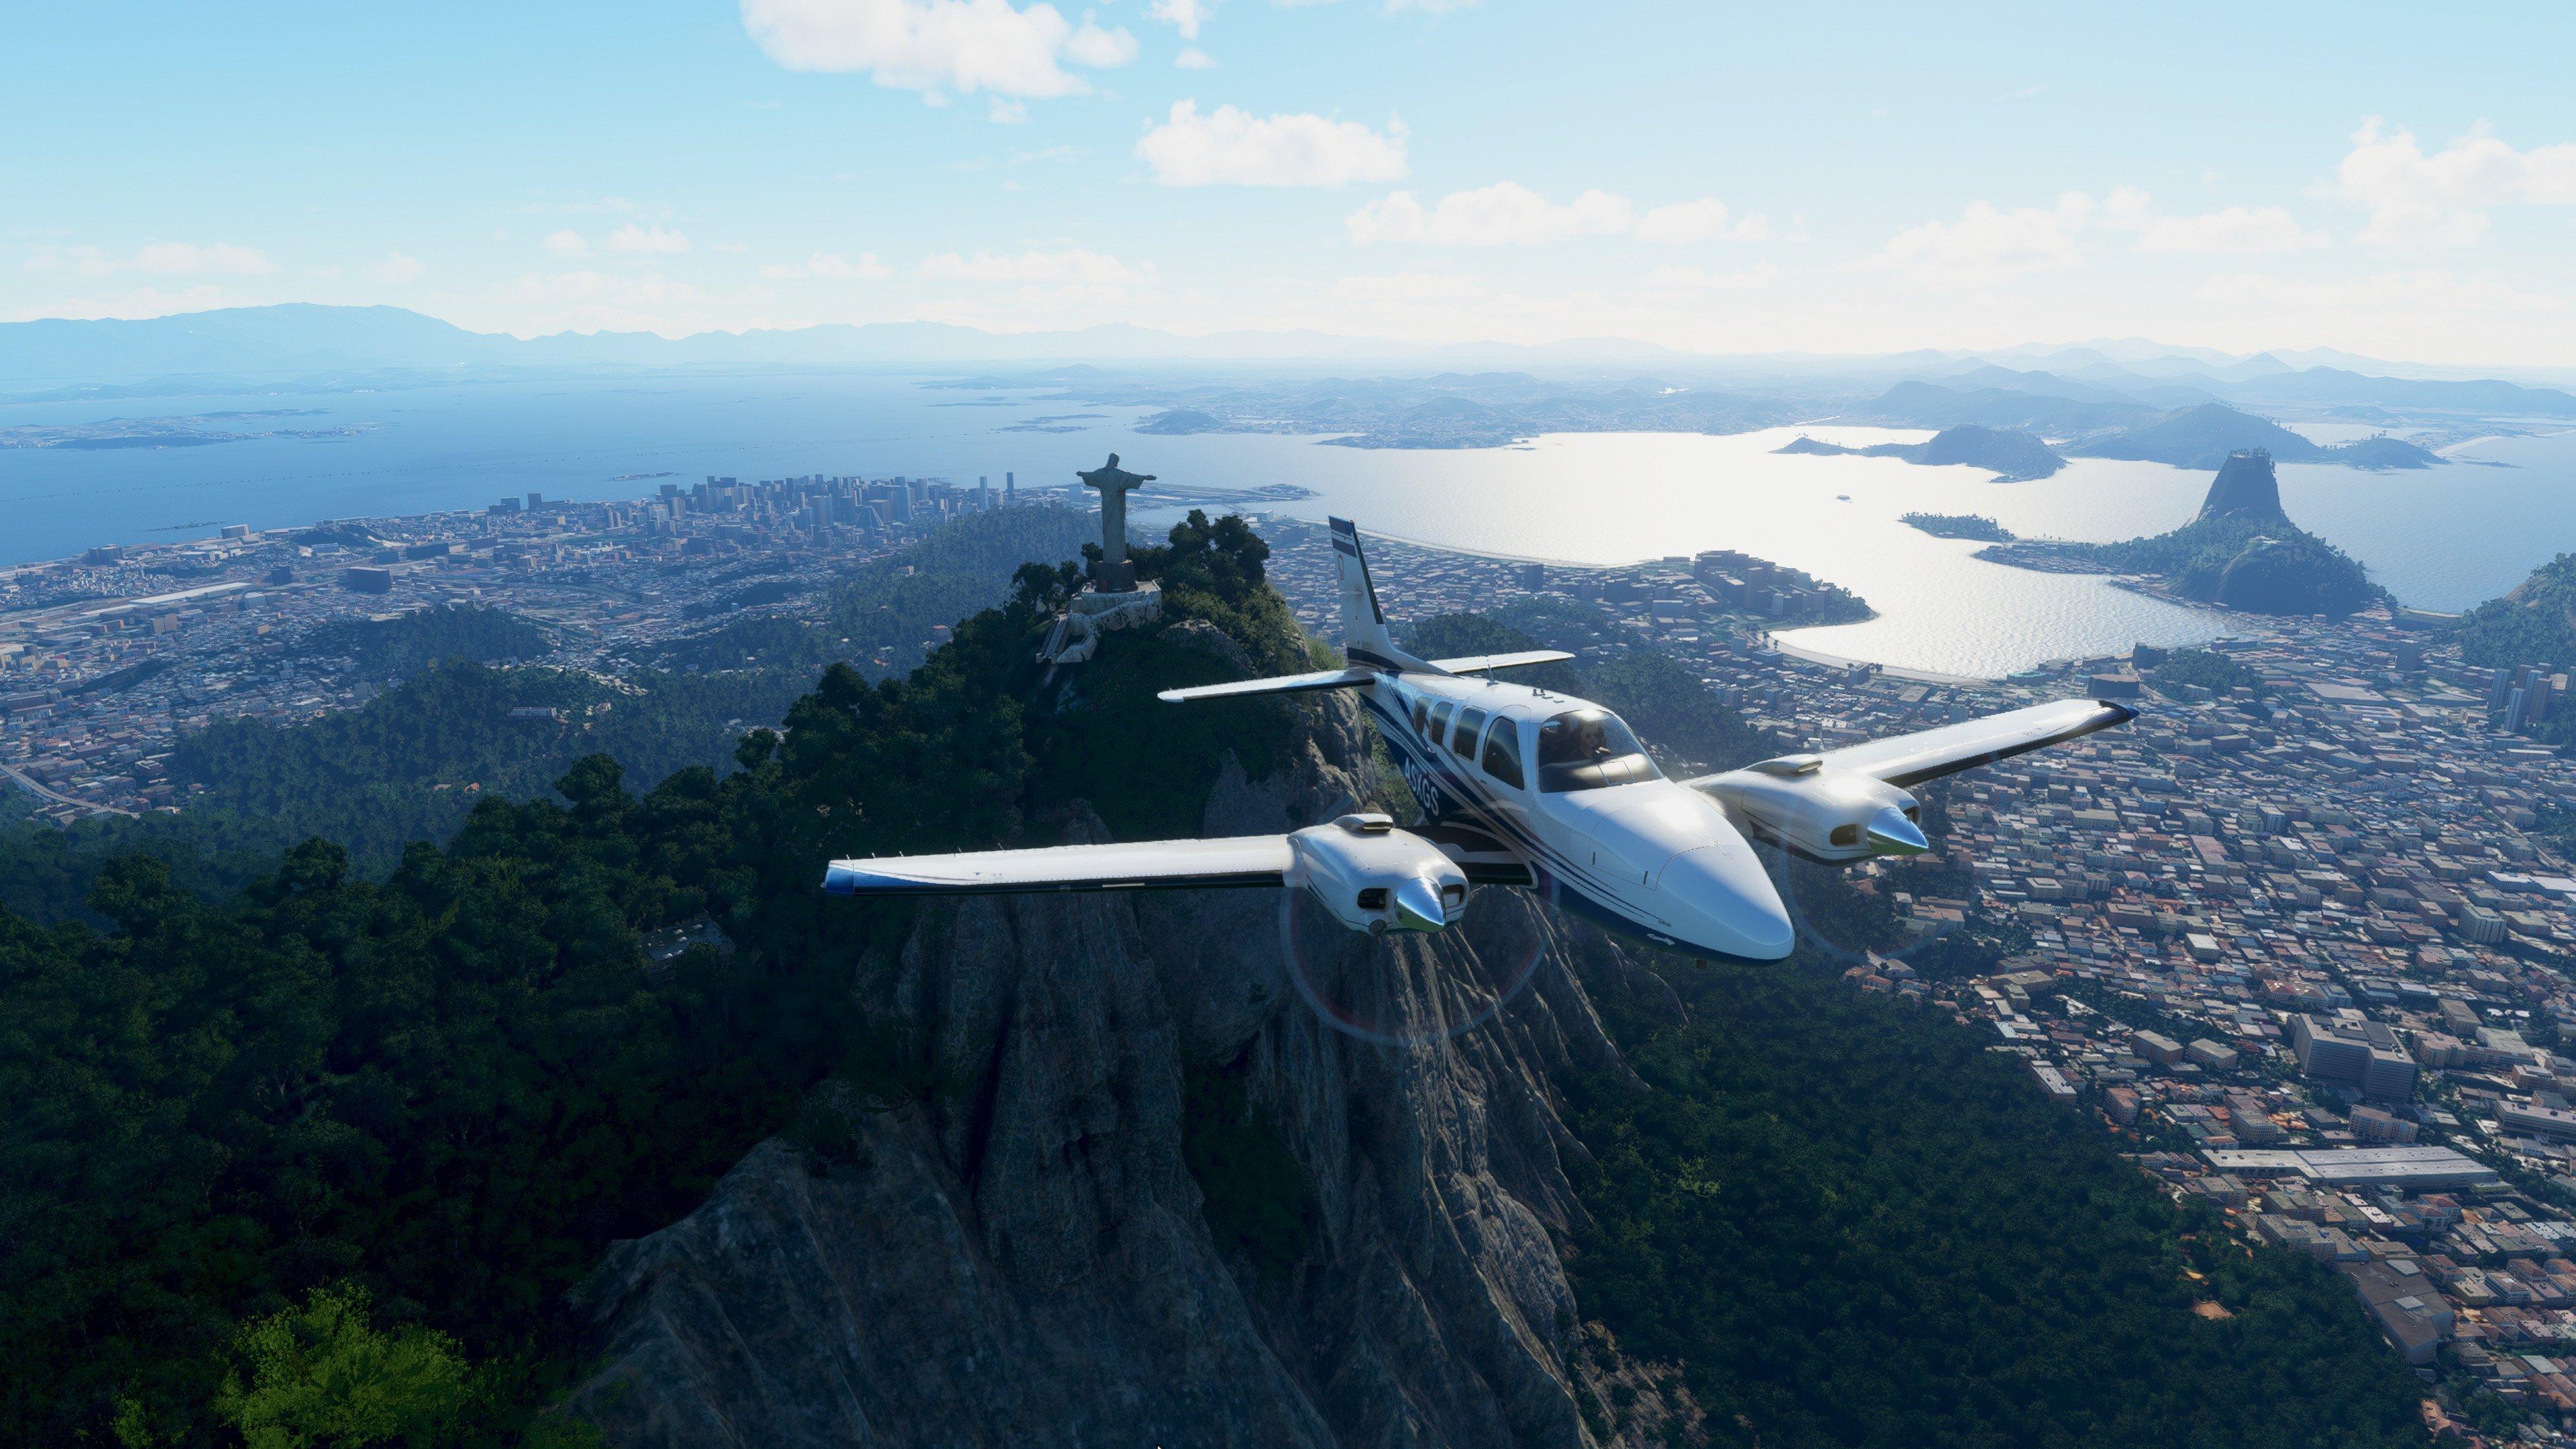 The 5 Most Realistic Flight Simulators For PS5, PS4, XBOX And PC